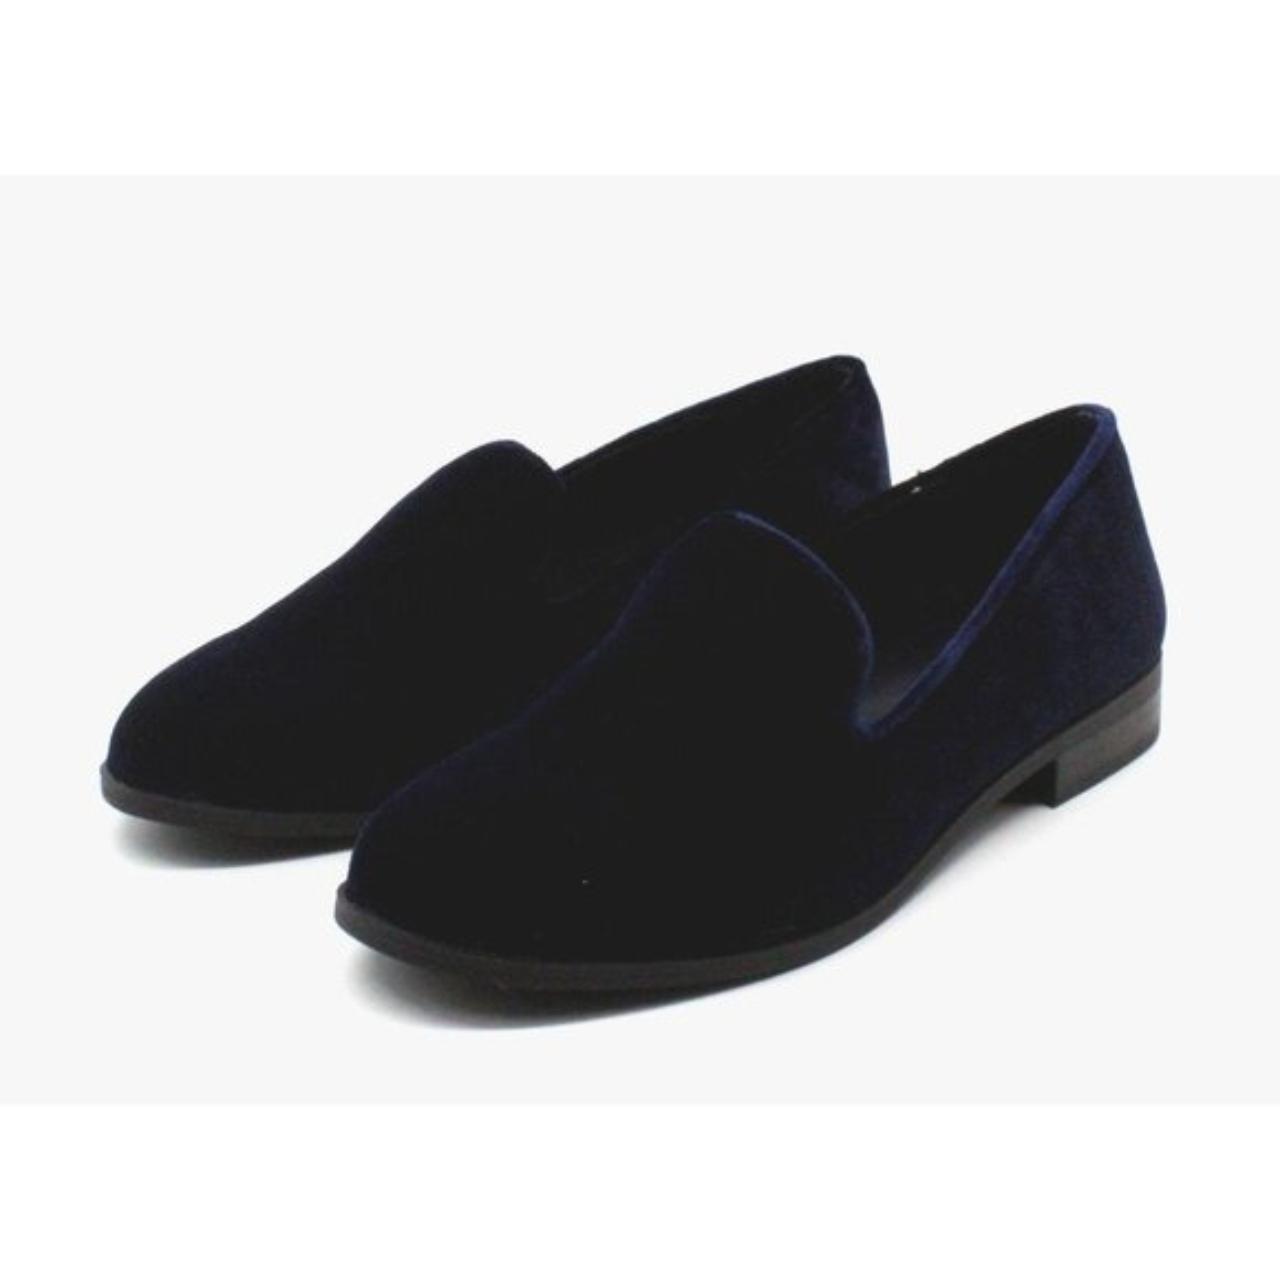 Product Image 3 - Bandolino Lima Loafers Women's Shoes

These